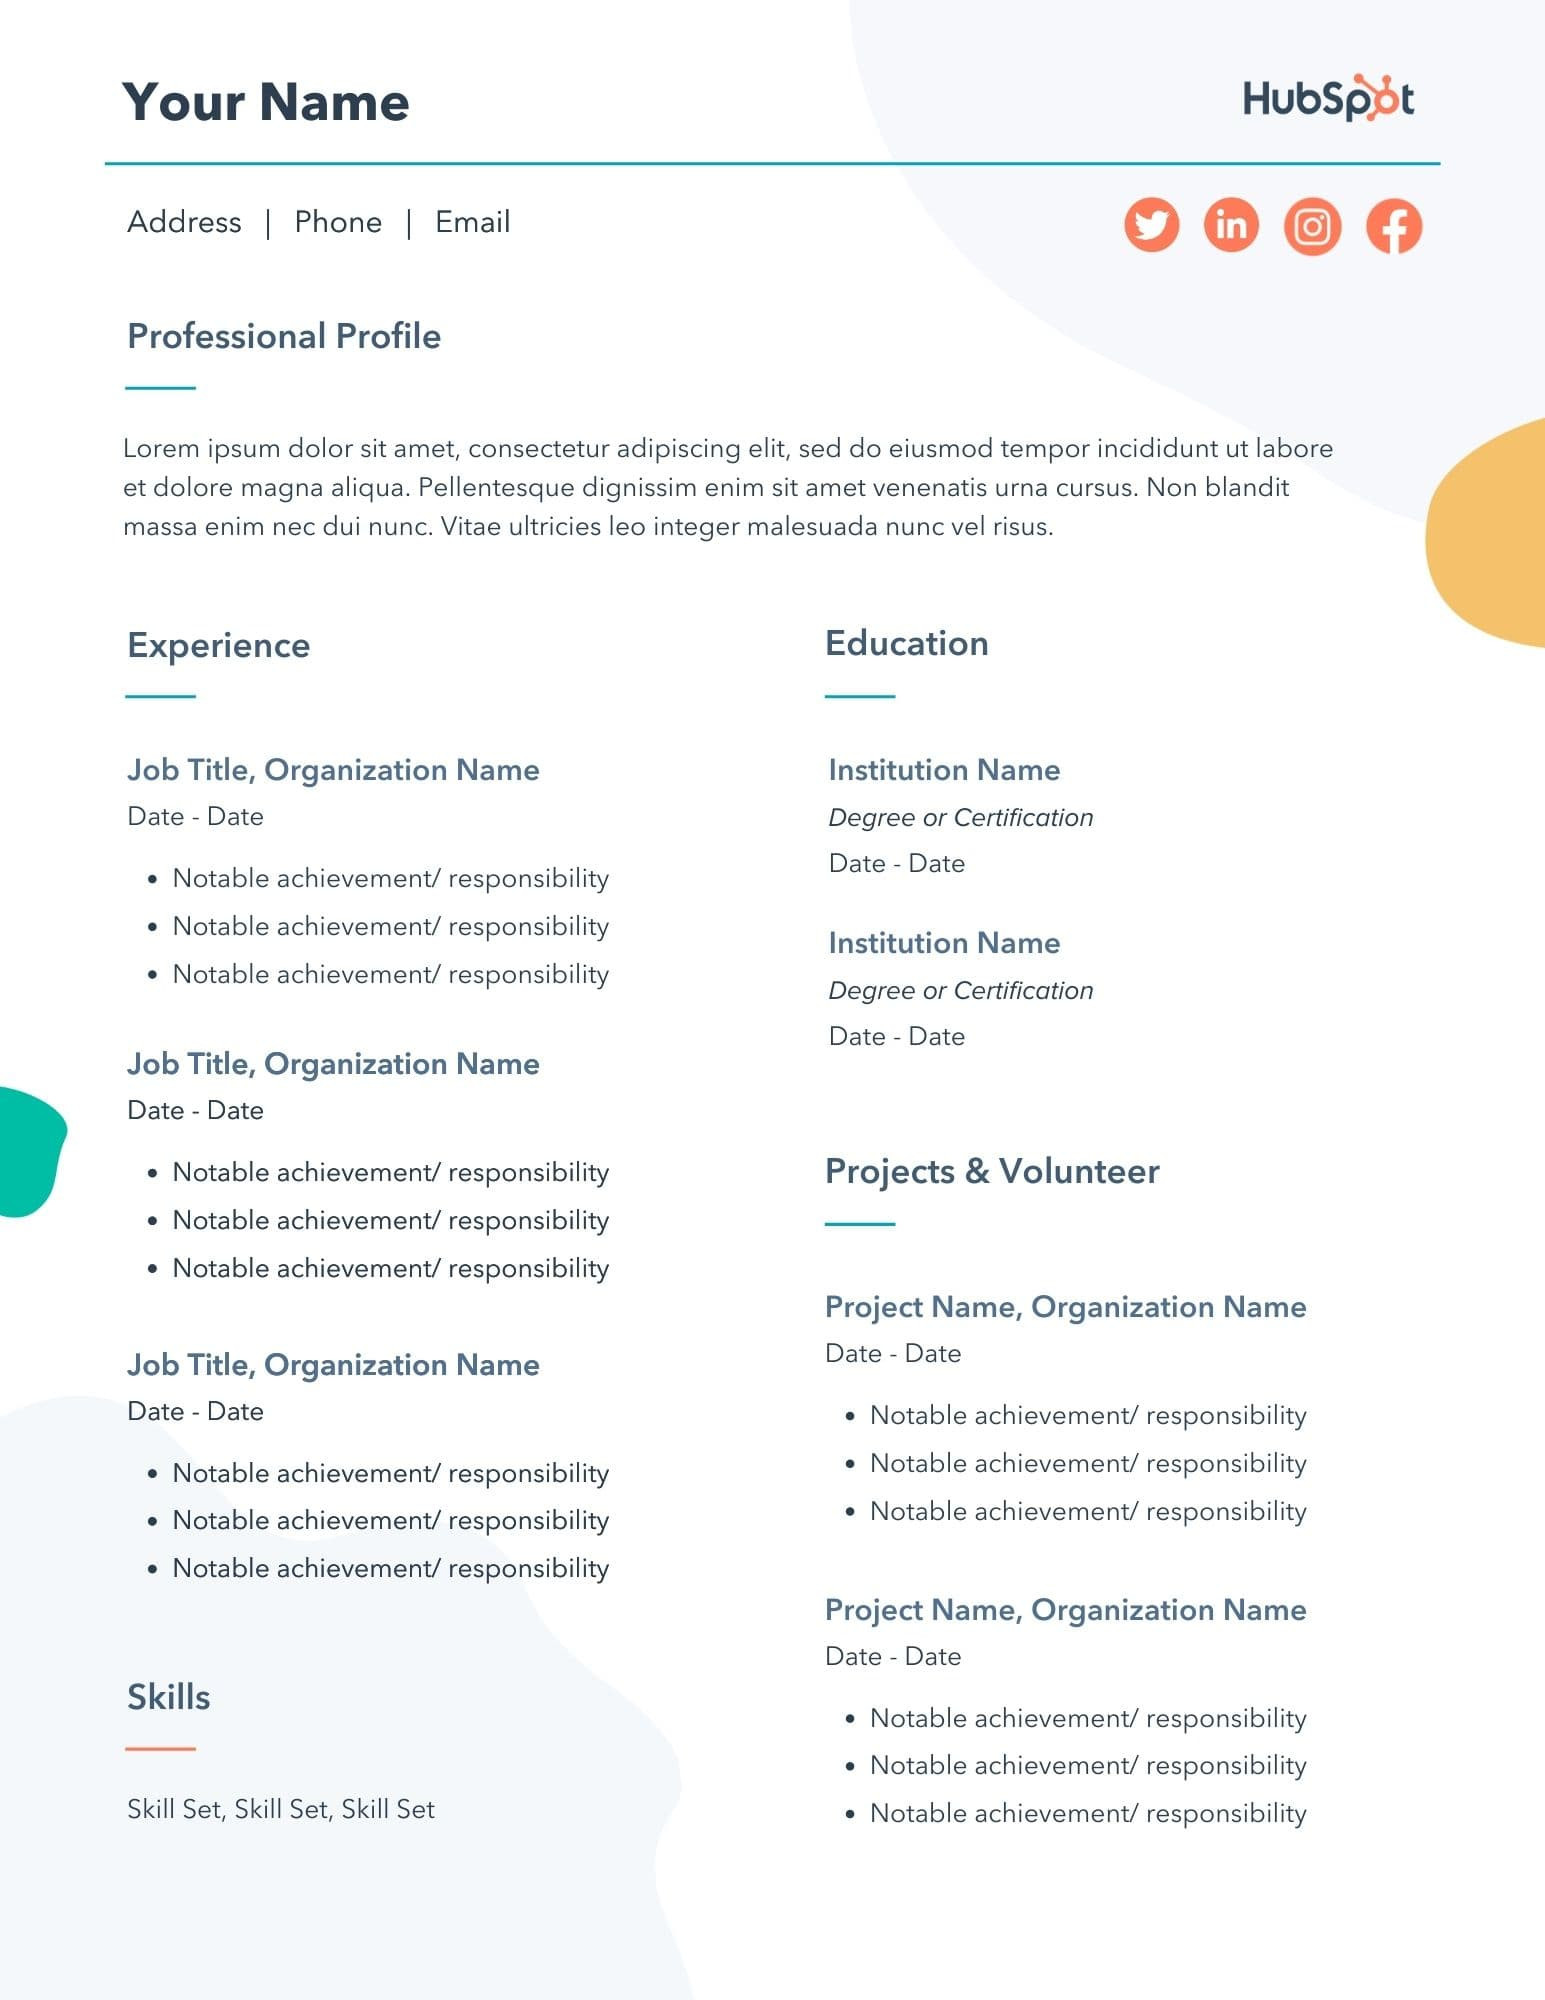 Up to Work Free Resume Template 29 Free Resume Templates for Microsoft Word (& How to Make Your Own)